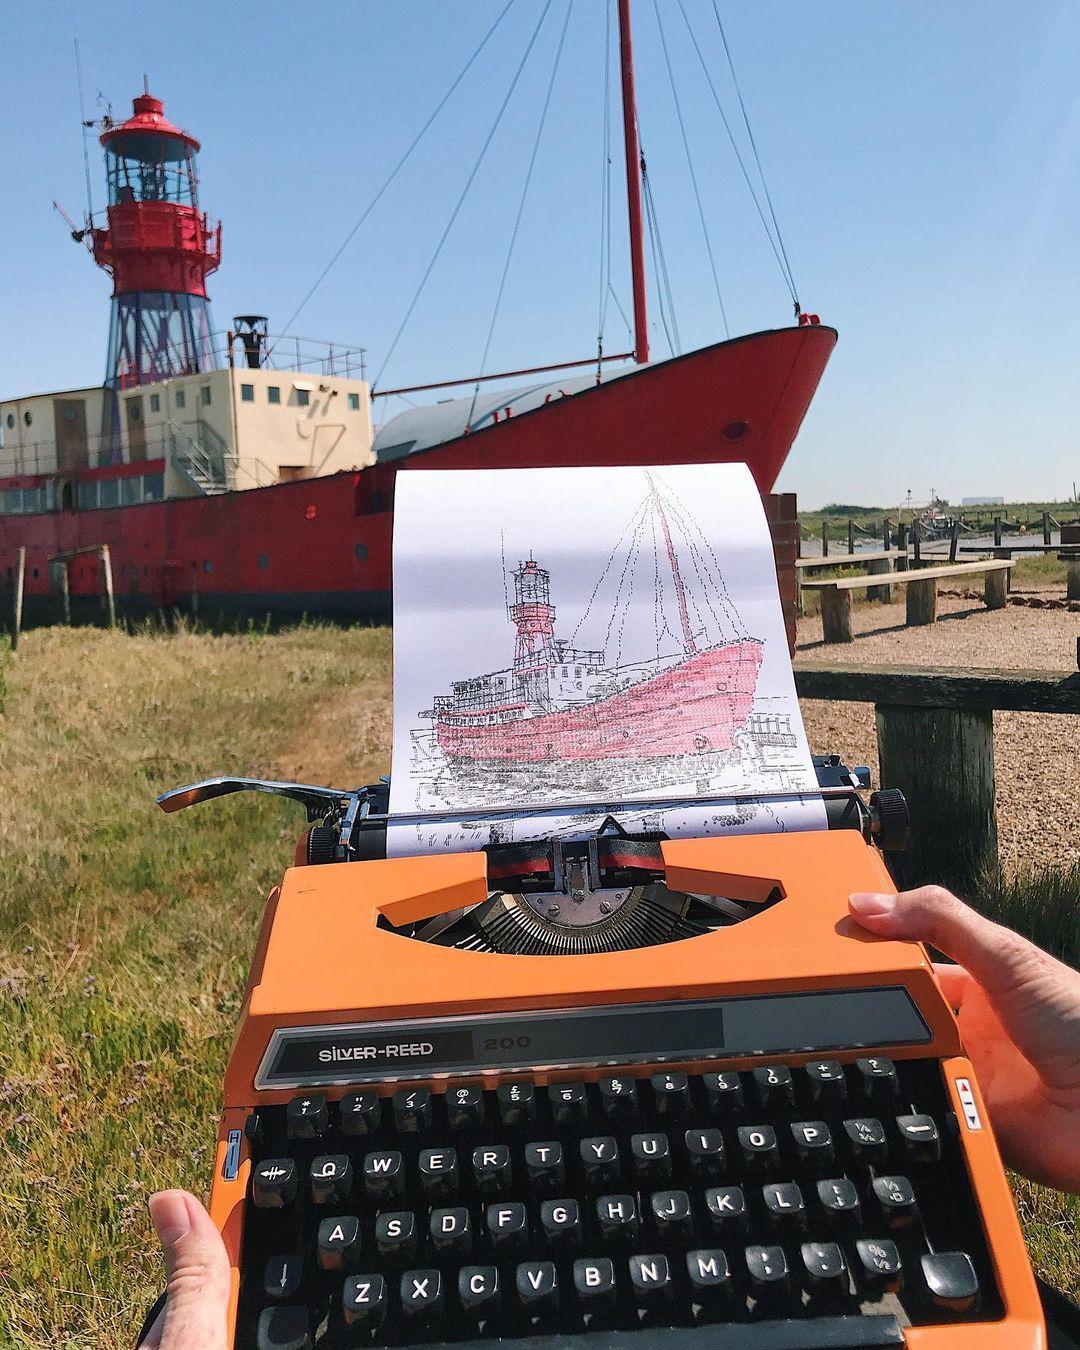 The Fellowship Afloat light vessel at Tollesbury Marina, in Essex. (Courtesy of <a href="https://www.instagram.com/jamescookartwork/">James Cook Artwork</a>)